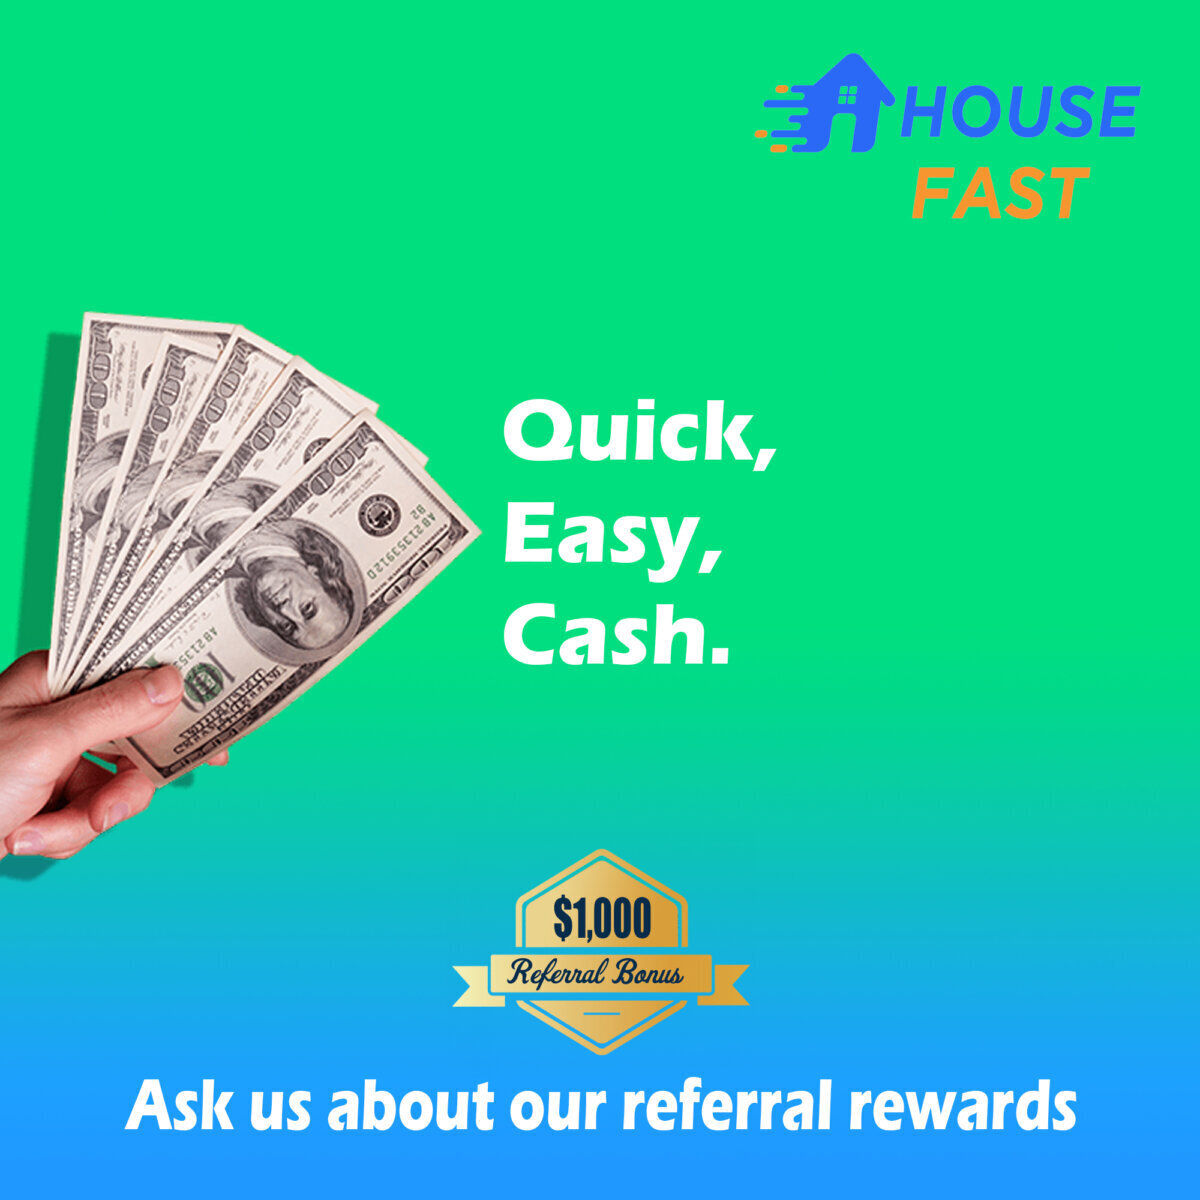 House Fast™ Is Offering $1,000 Referral Fees For Vacant Properties